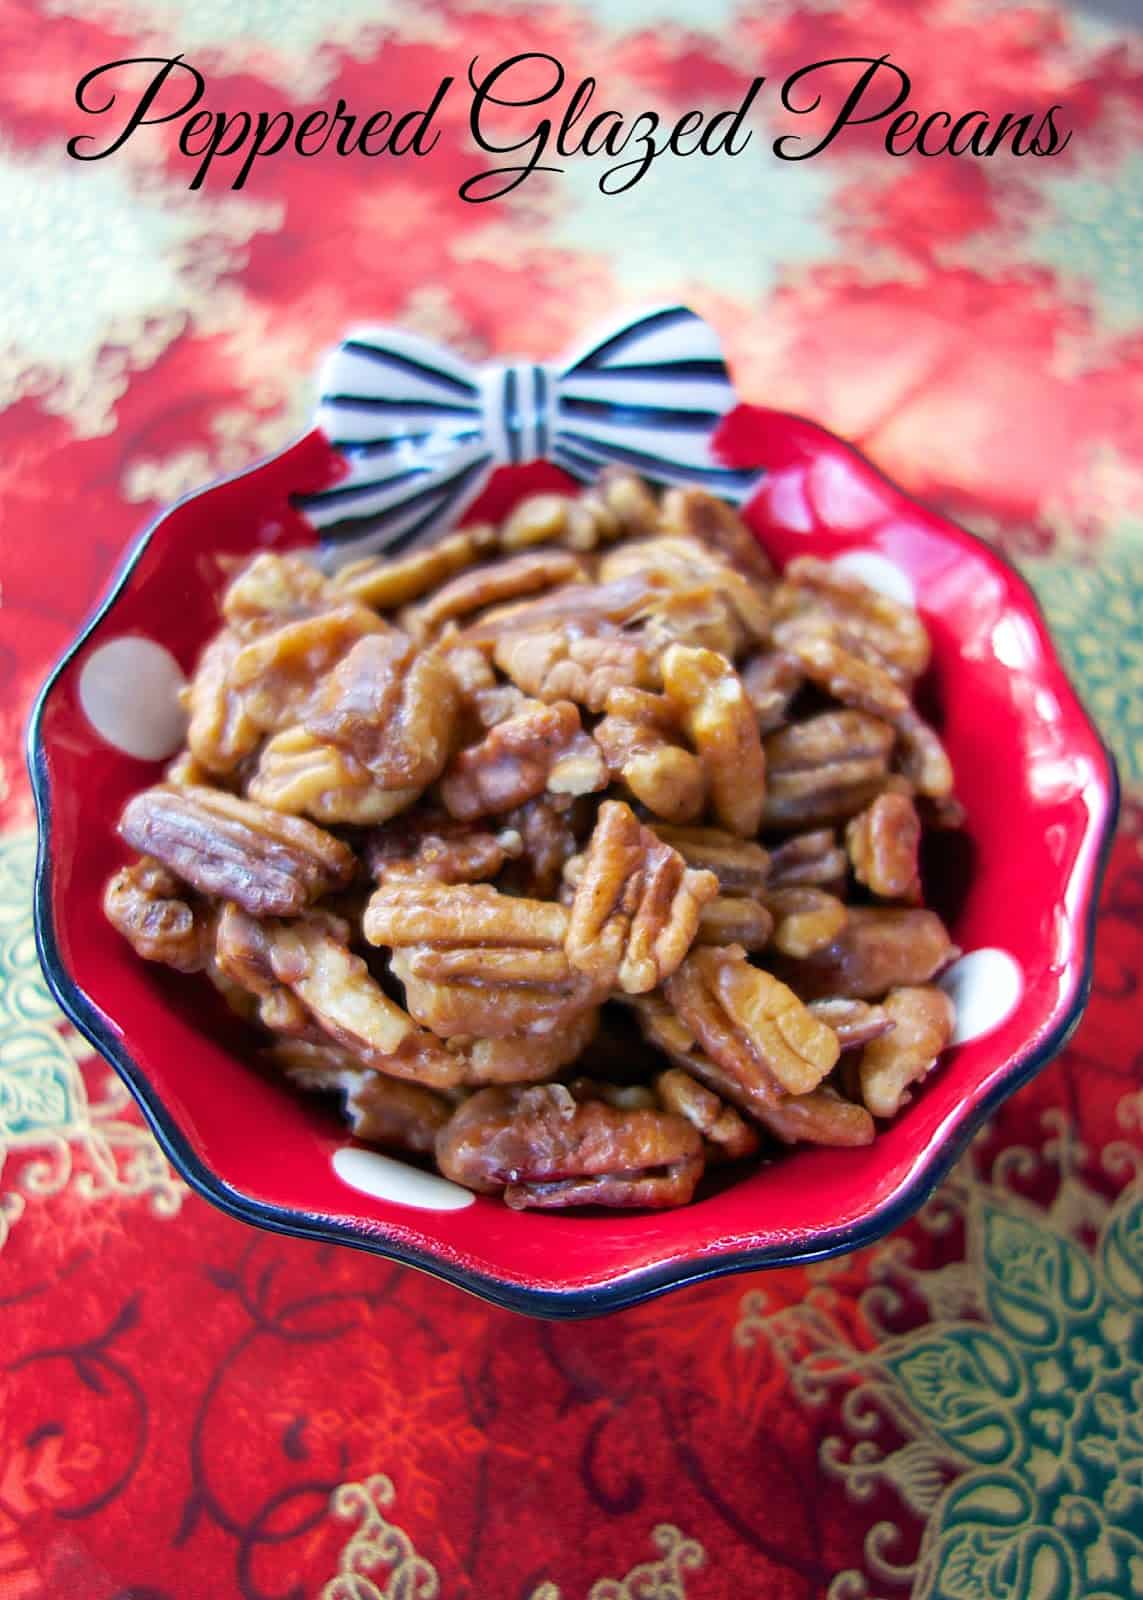 Peppered Glazed Pecans - you'll want to double the recipe - they go fast! Pecans coated in brown sugar, butter, corn syrup, pepper and salt. Great for snacking on at holiday parties! Also makes a great homemade gift! Everyone LOVES this easy snack recipe!